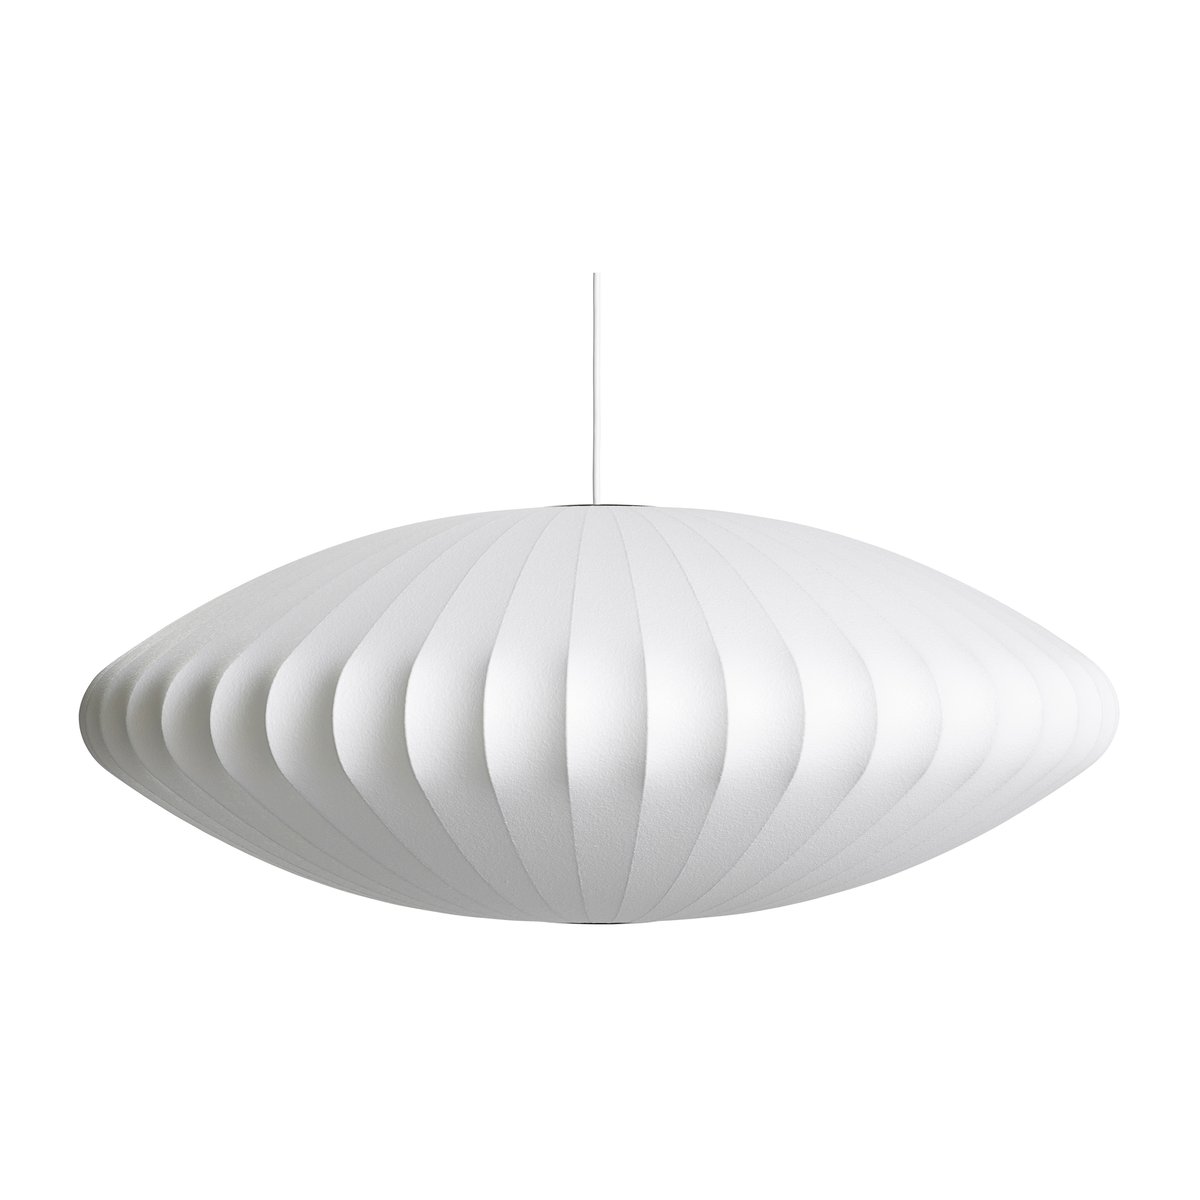 HAY Nelson Bubble Saucer hanglamp L Off white